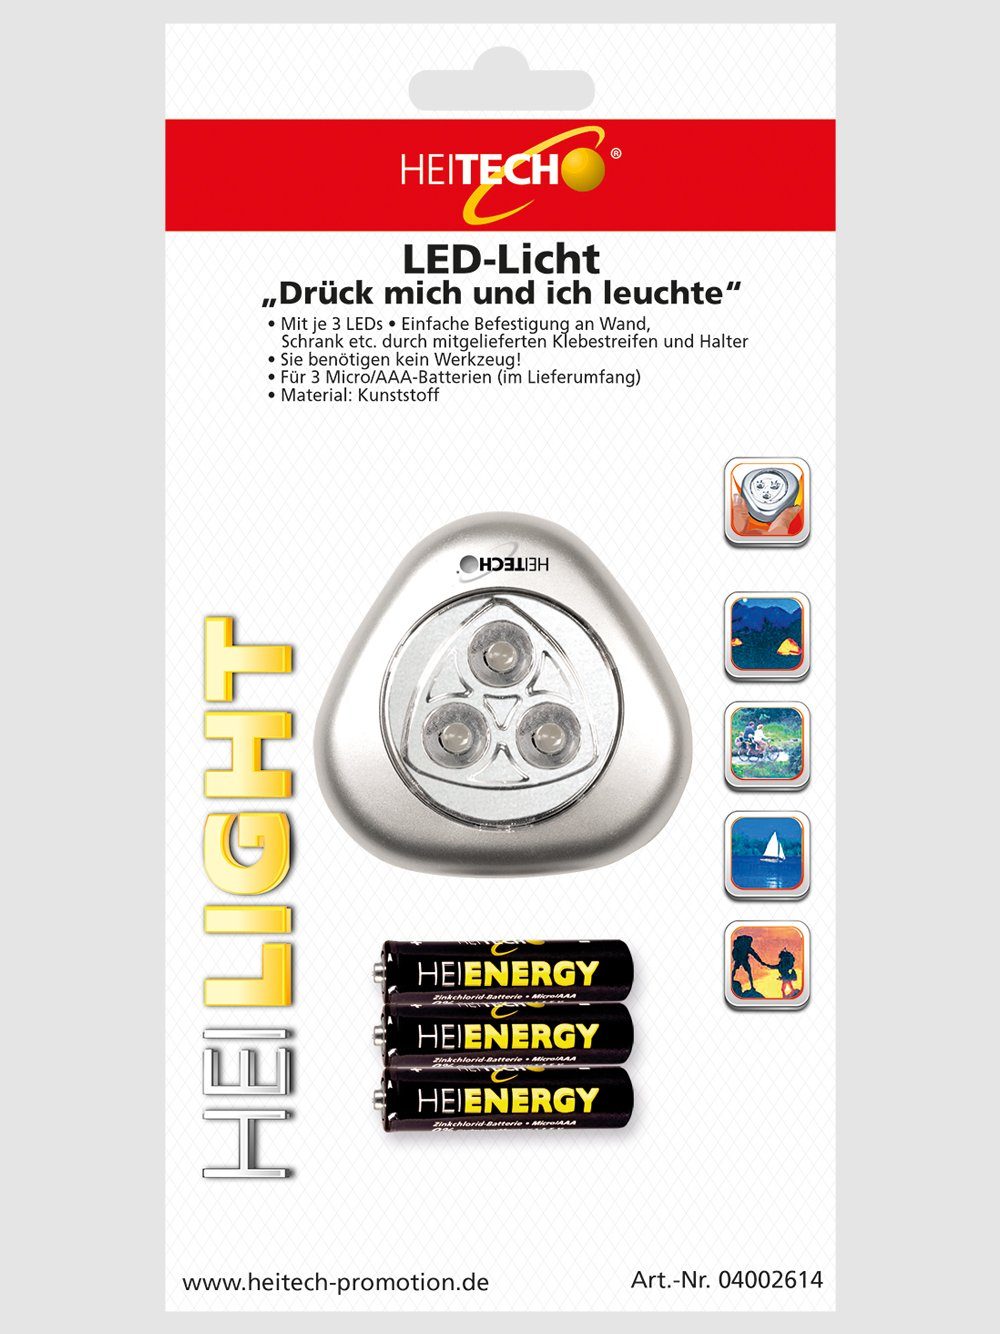 HEITECH LED Arbeitsleuchte LED-Licht"Drück mich" mit 3 LEDs, inkl. 3 Micro/AAA Batterien